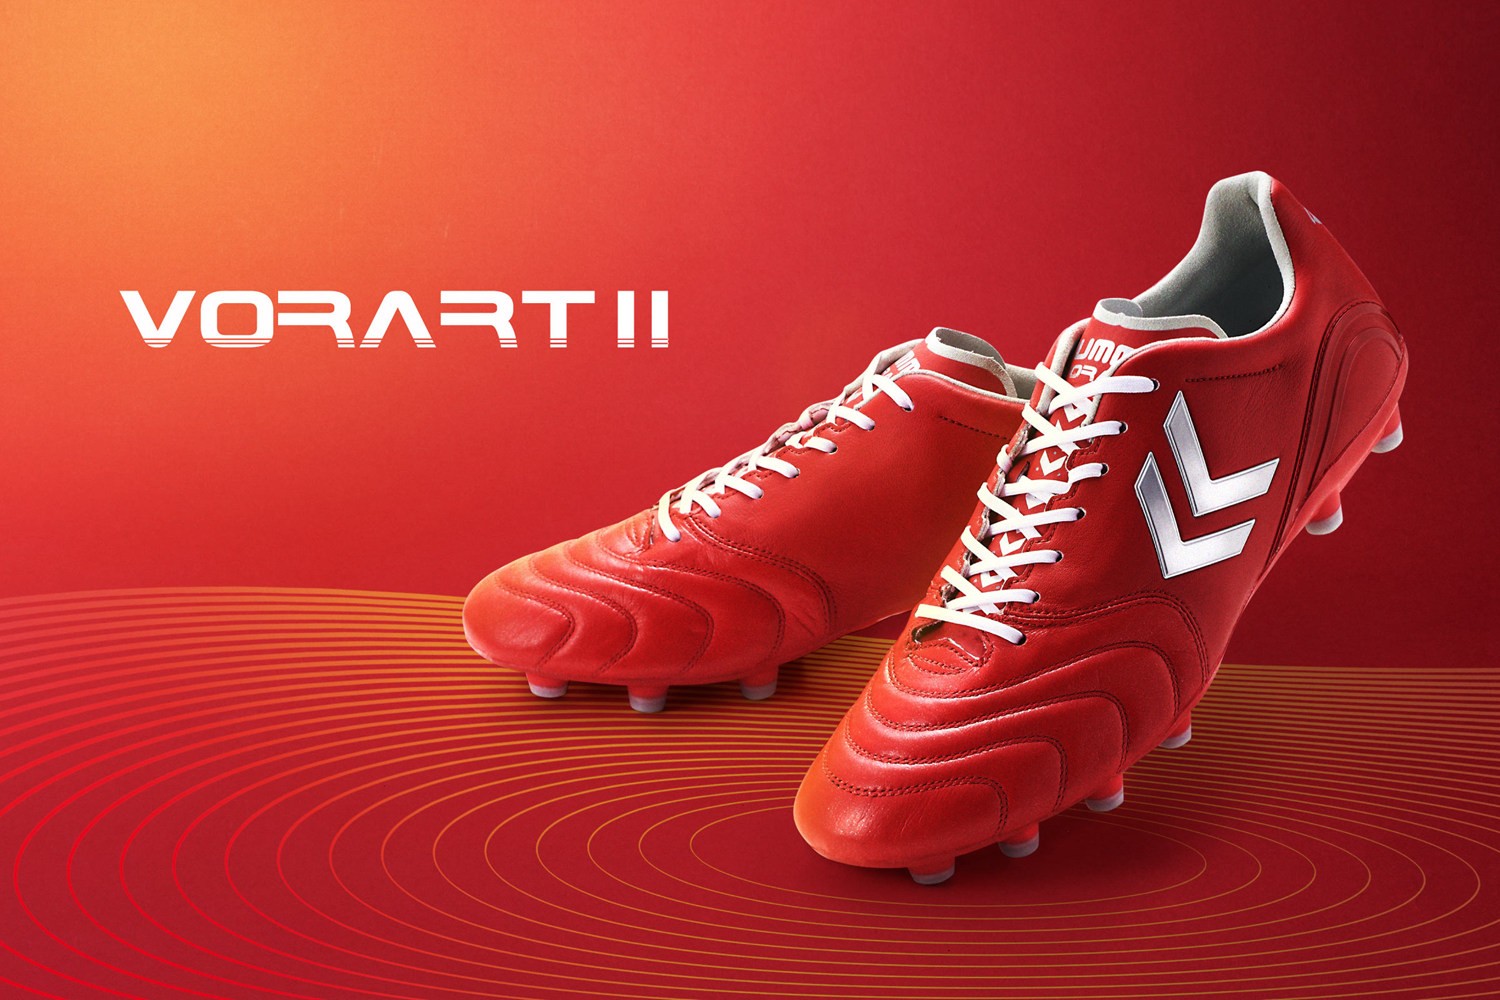 New color Hummel VORART II soccer boots are available - laitimes